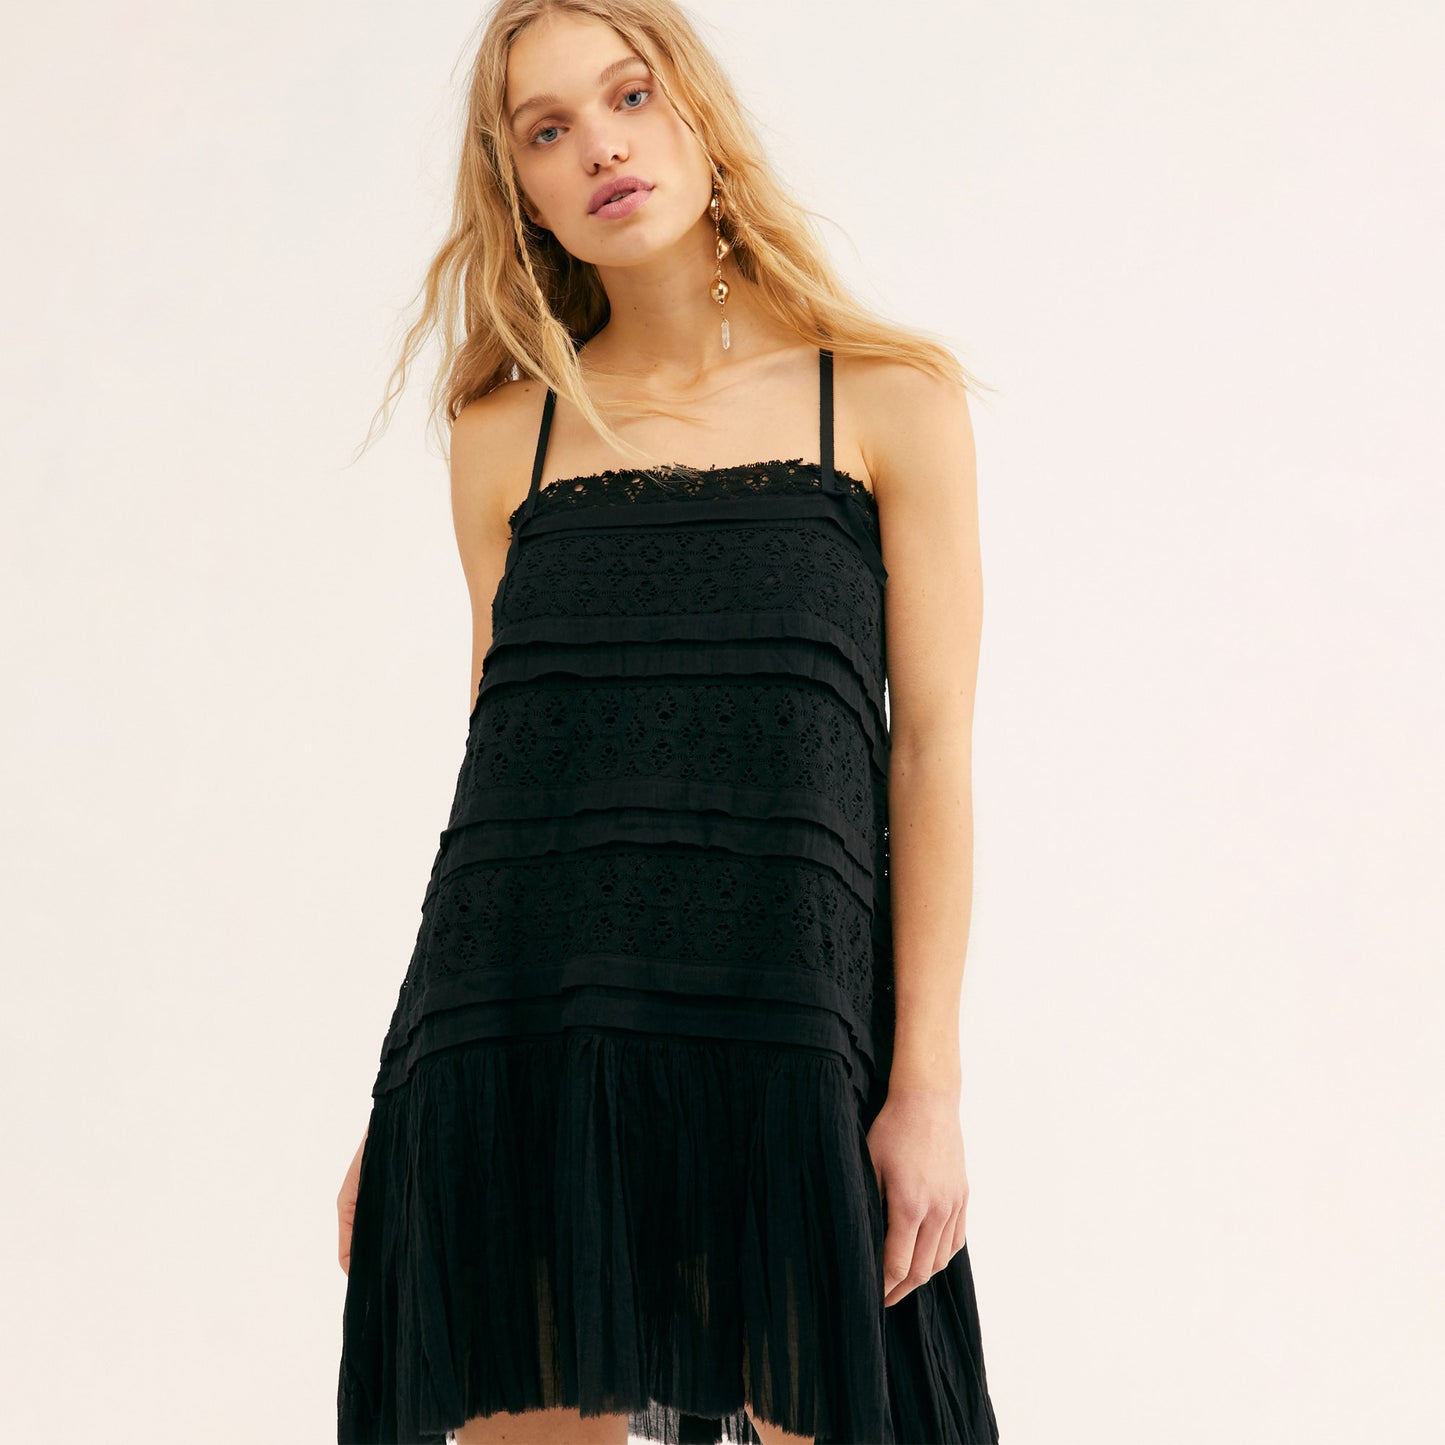 Free People Shailee Dress. This super sweet mini slip will give your look that feminine touch. Featuring a tiered detail, flowy silhouette, crochet lace paneling, gauzy ruffled skirt, adjustable straps, straight neckline, and a mini length. Style this piece with lots of jewlery and lace up sandals for the most romantic look!